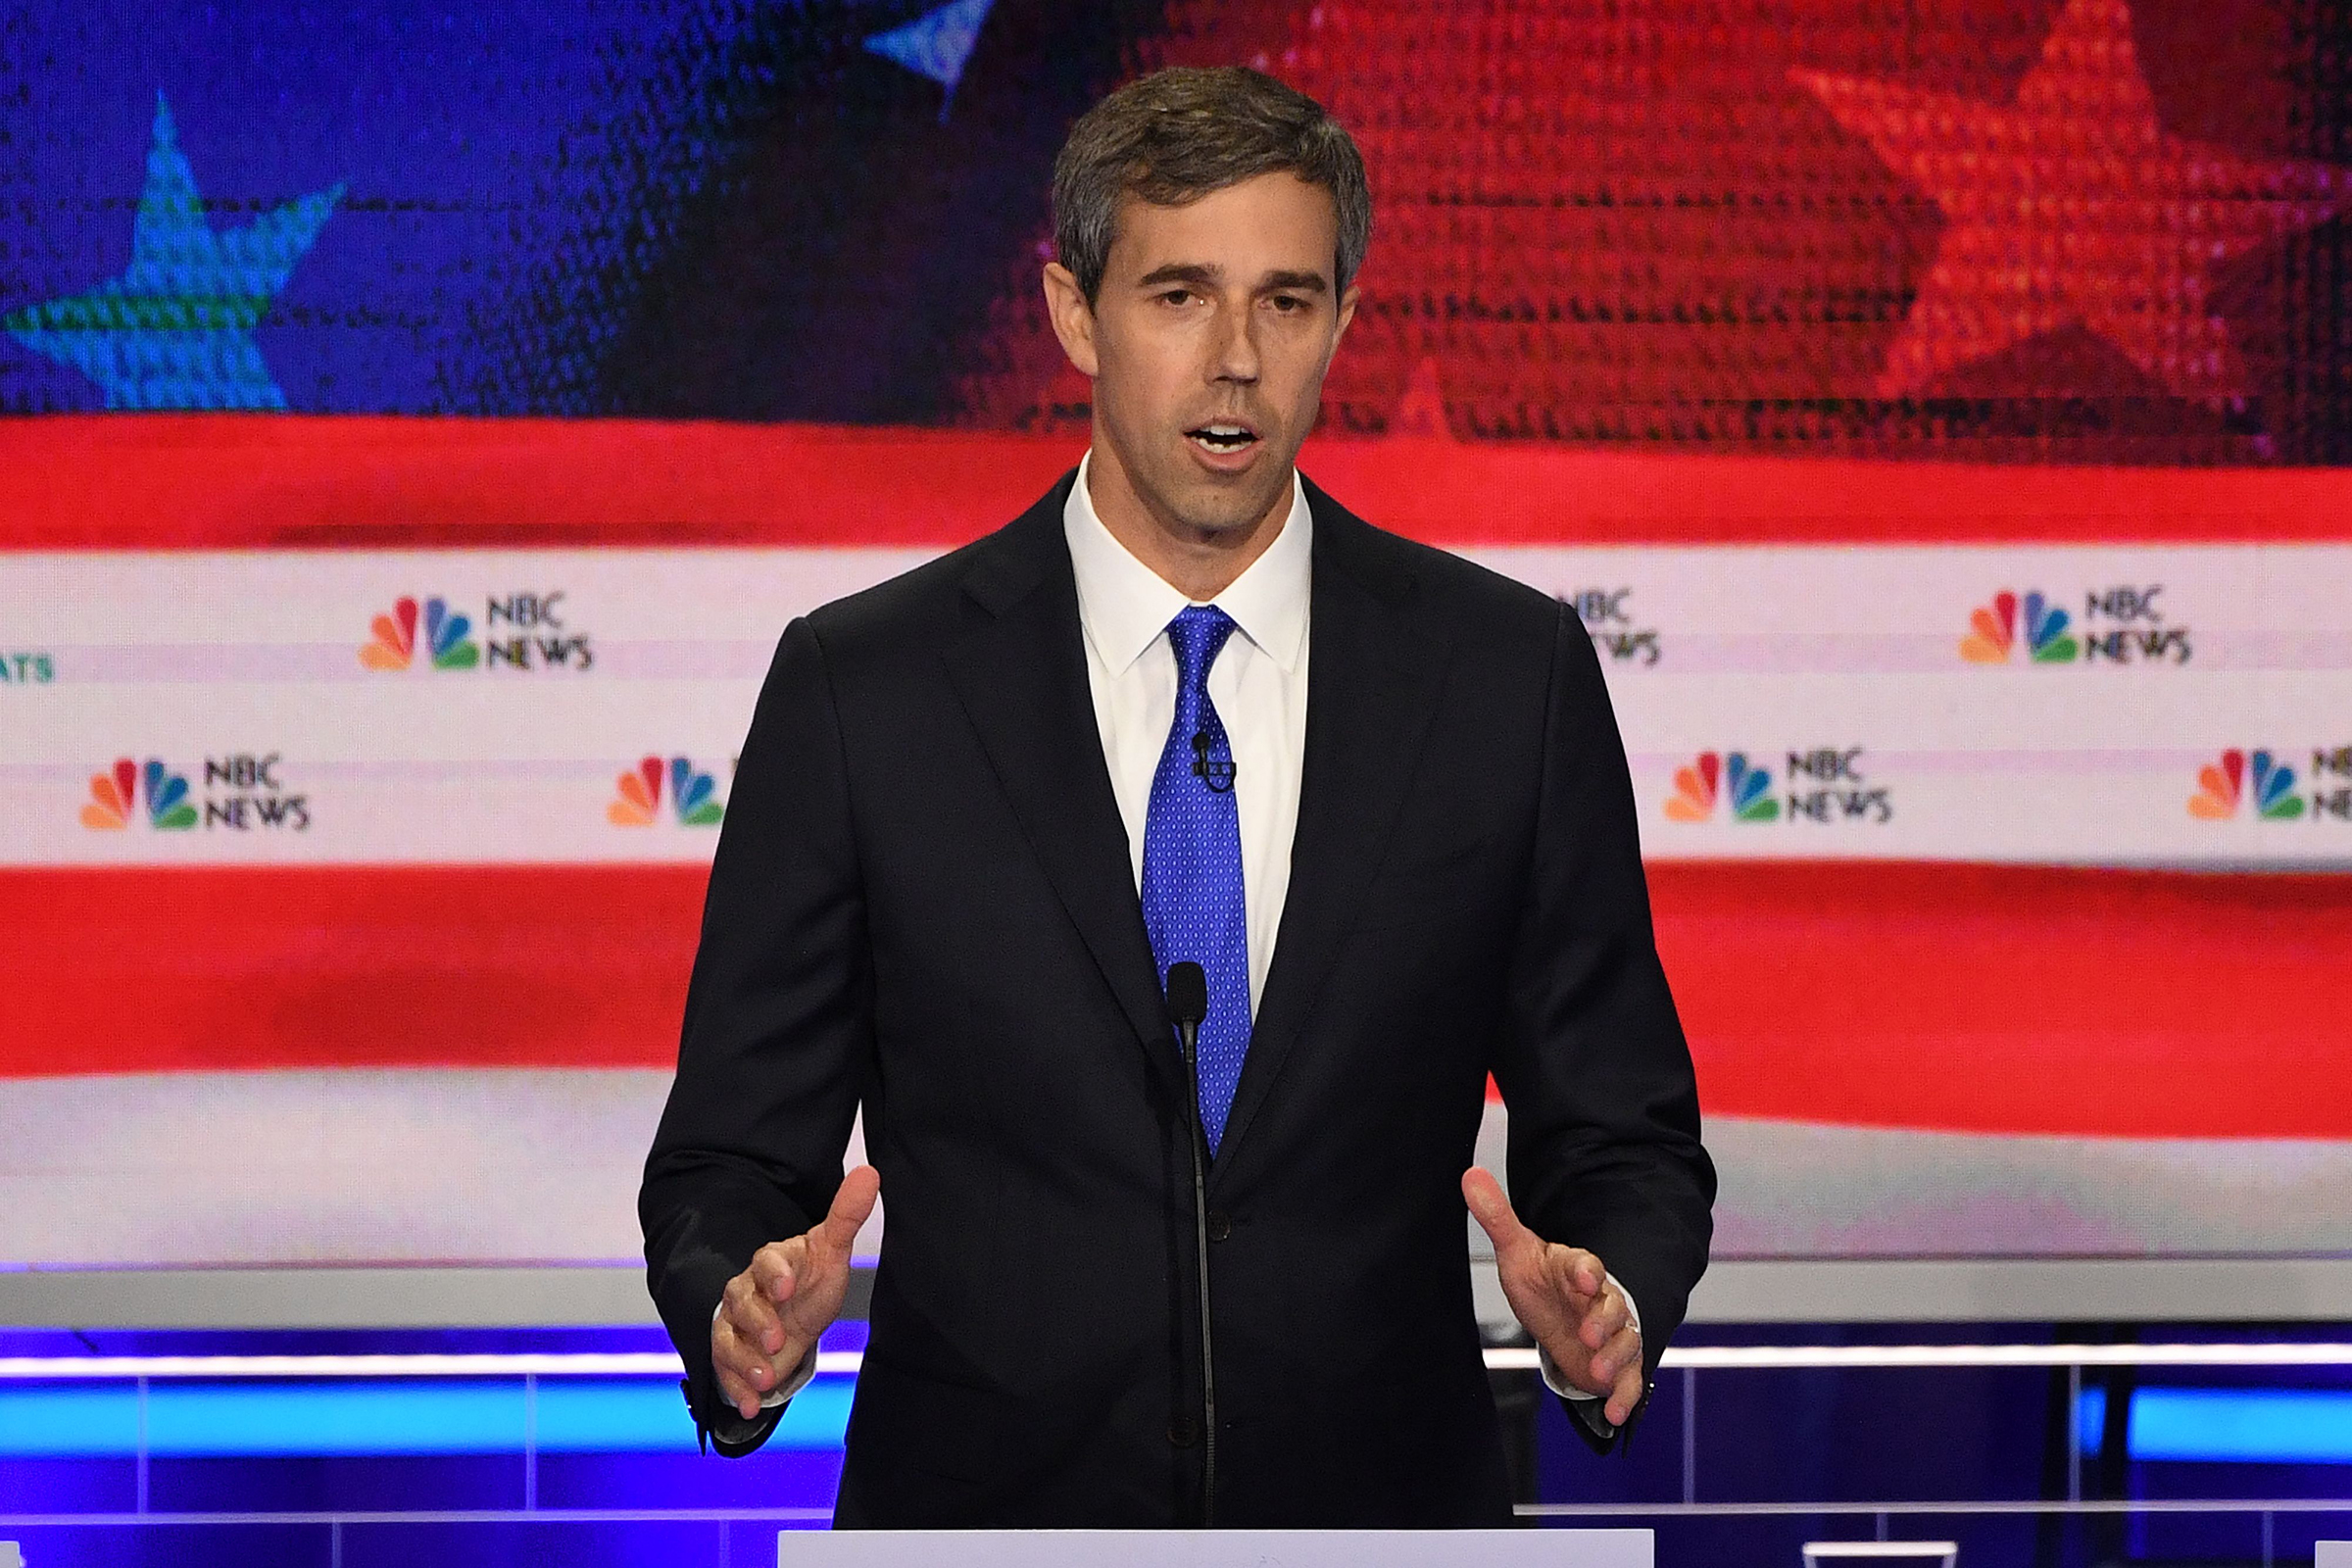 Democratic presidential hopefuls former US Representative for Texas' 16th congressional district Beto O'Rourke participates in the first Democratic primary debate of the 2020 presidential campaign season hosted by NBC News at the Adrienne Arsht Center for the Performing Arts in Miami, Florida, on June 26, 2019. (Jim Watson—AFP/Getty Images)